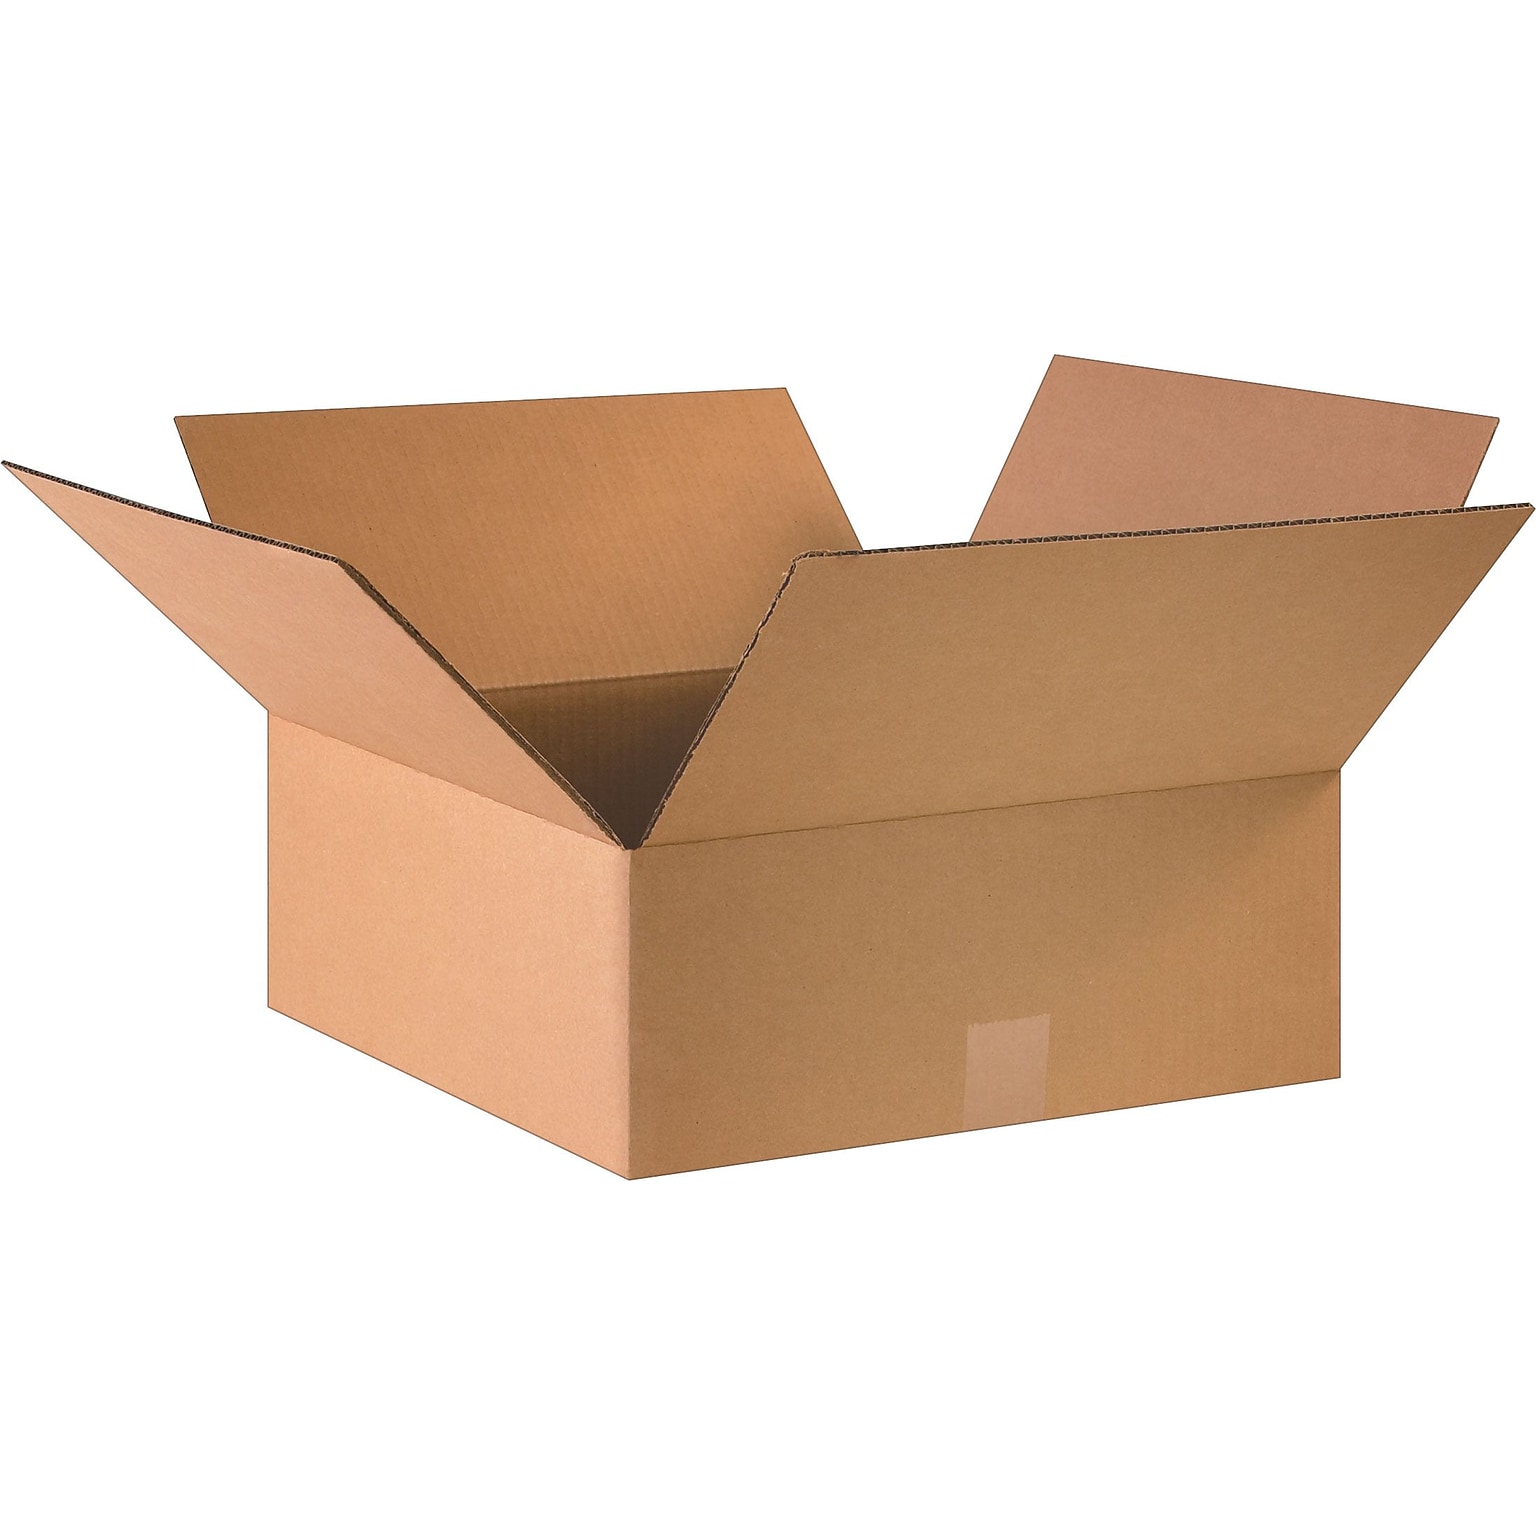 SI Products 16 x 16 x 6 Shipping Boxes, 32 ECT, Kraft, 25/Bundle (BS161606)